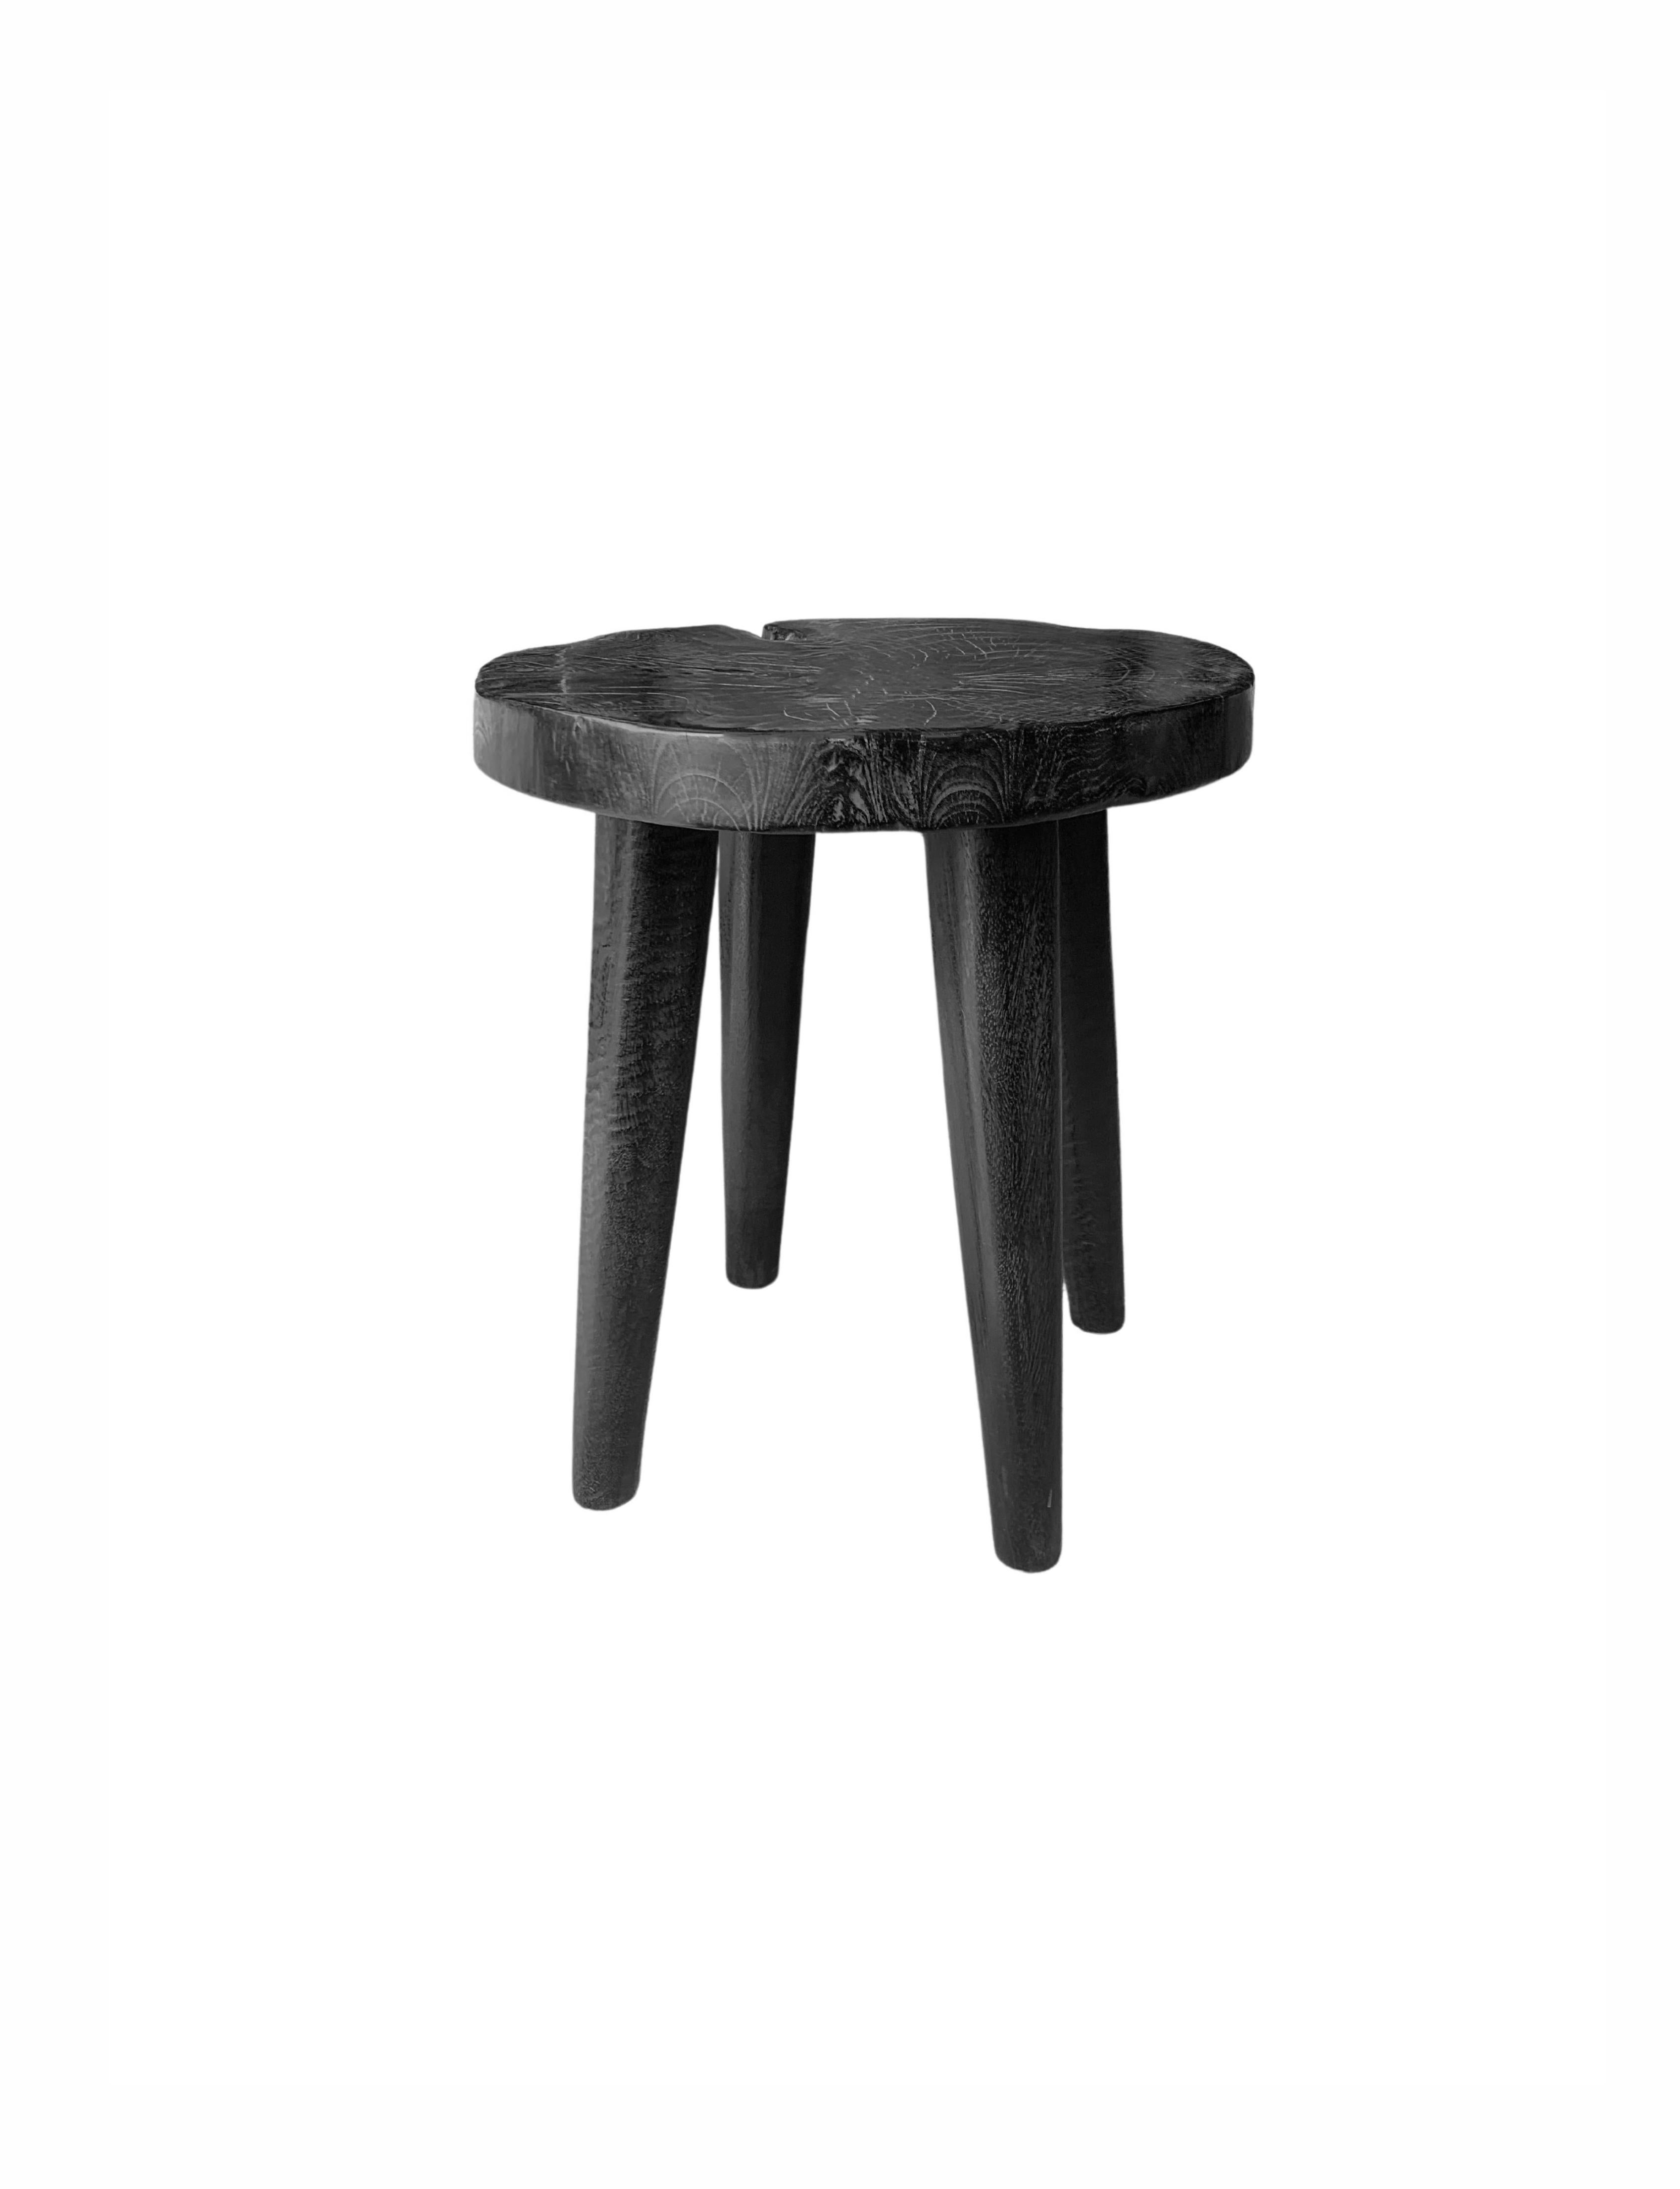 Hand-Crafted Sculptural Mango Wood Stool with Burnt Finish For Sale